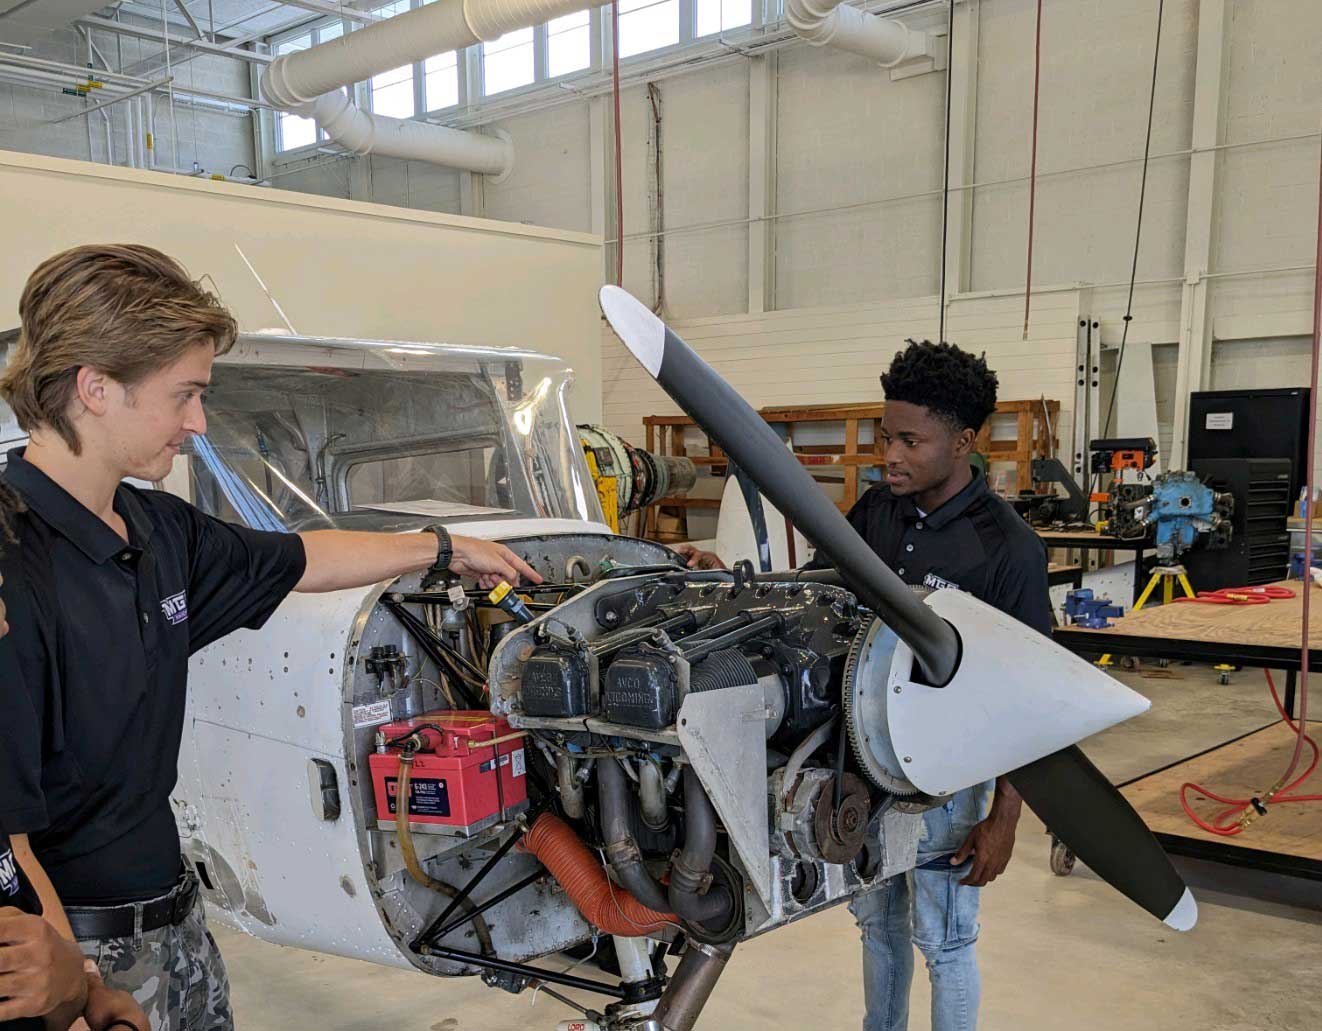 Griffin Region College and Career Academy students take Aviation Maintenance Technician classes through dual-enrollment with Middle Georgia State University.